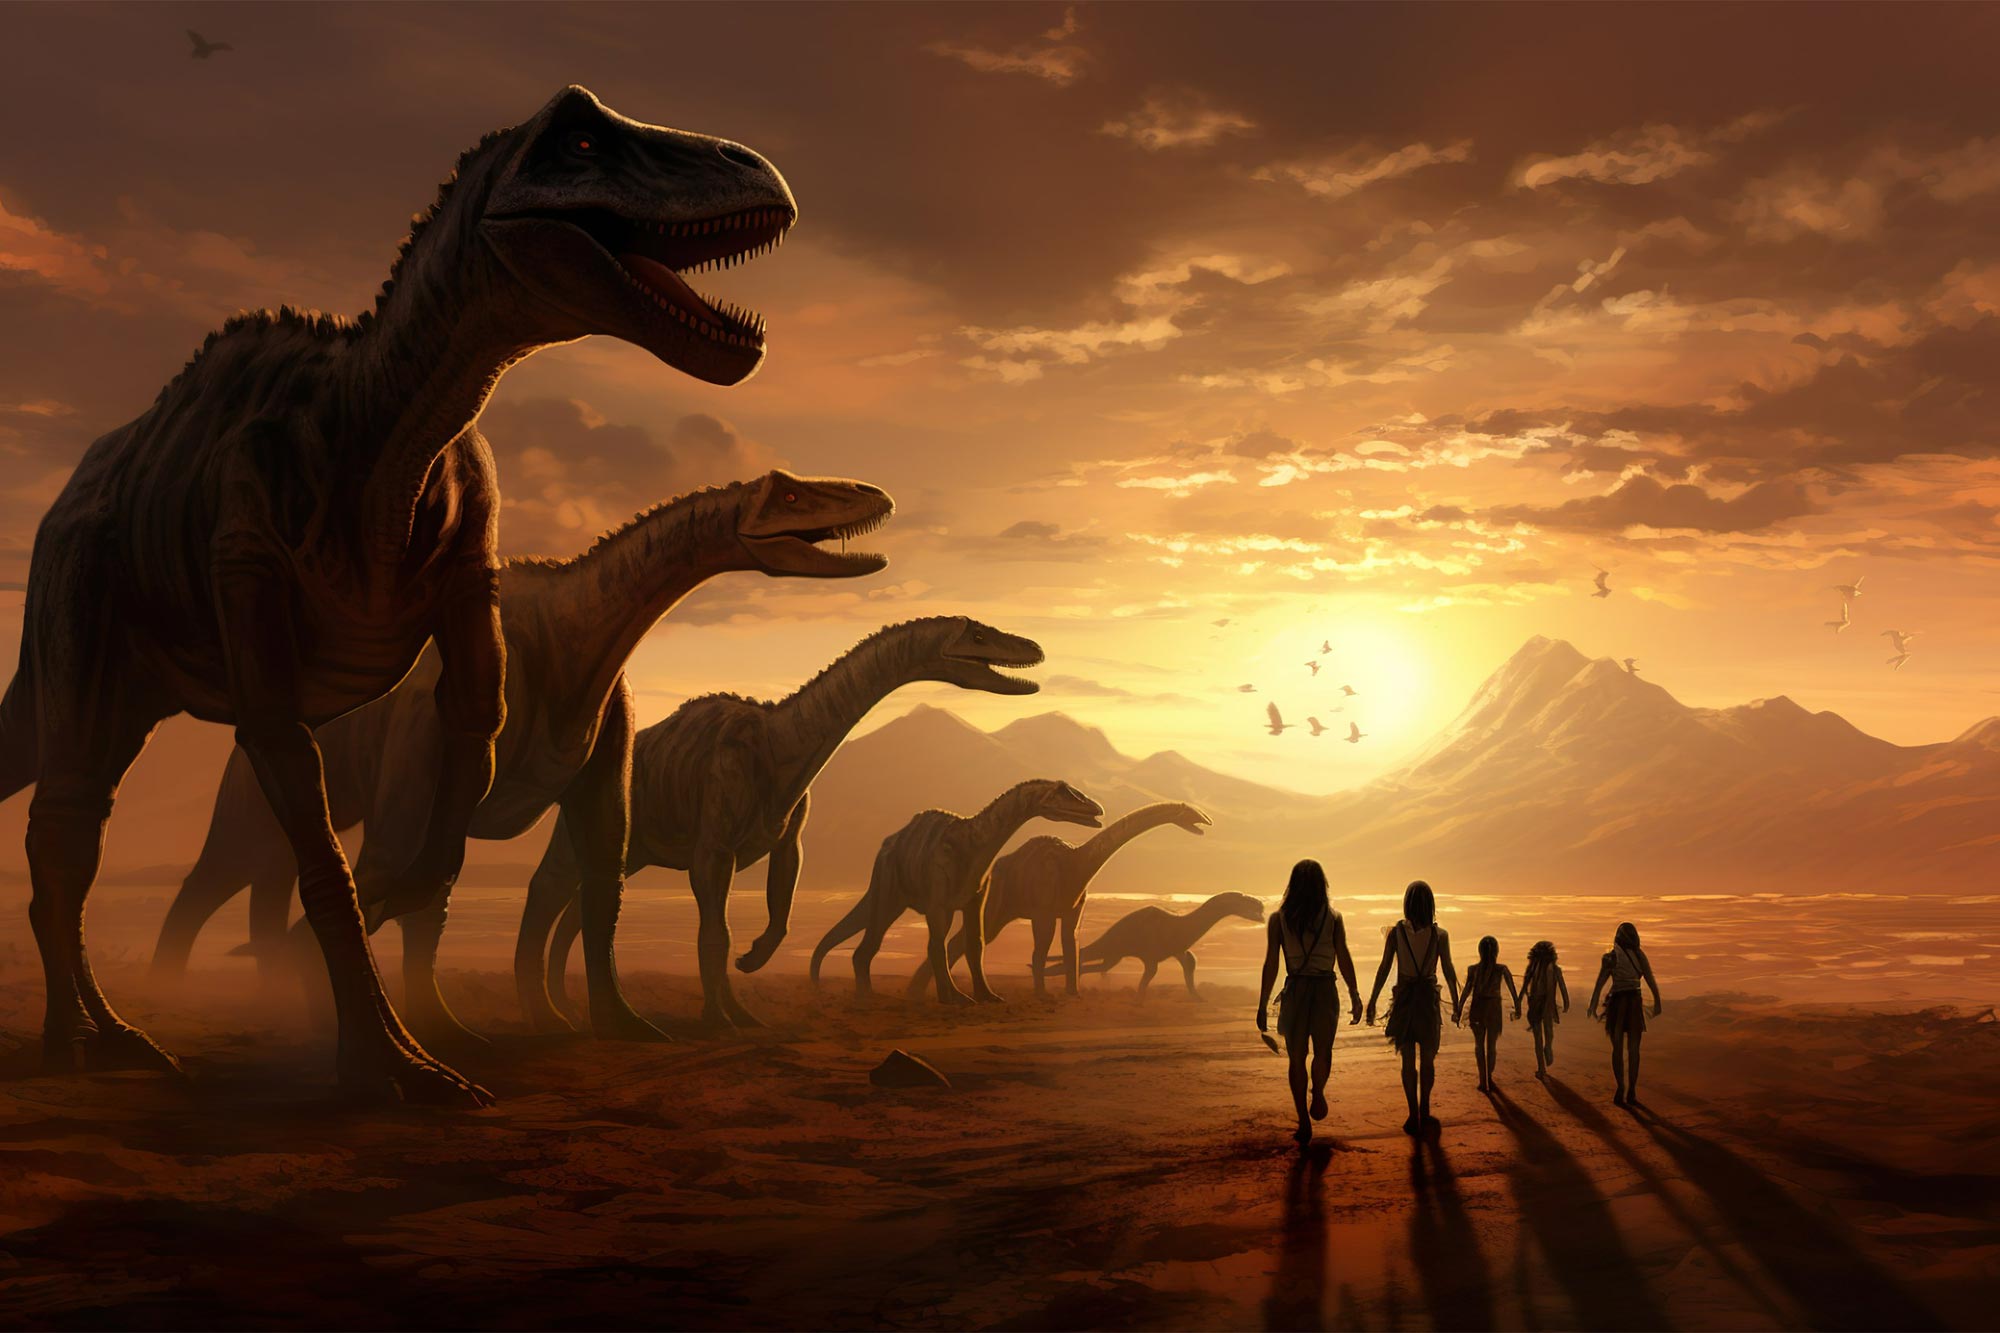 https://scitechdaily.com/images/Dinosaurs-With-Human-Ancestors.jpg?ezimgfmt=ng%3Awebp%2Fngcb2%2Frs%3Adevice%2Frscb2-1